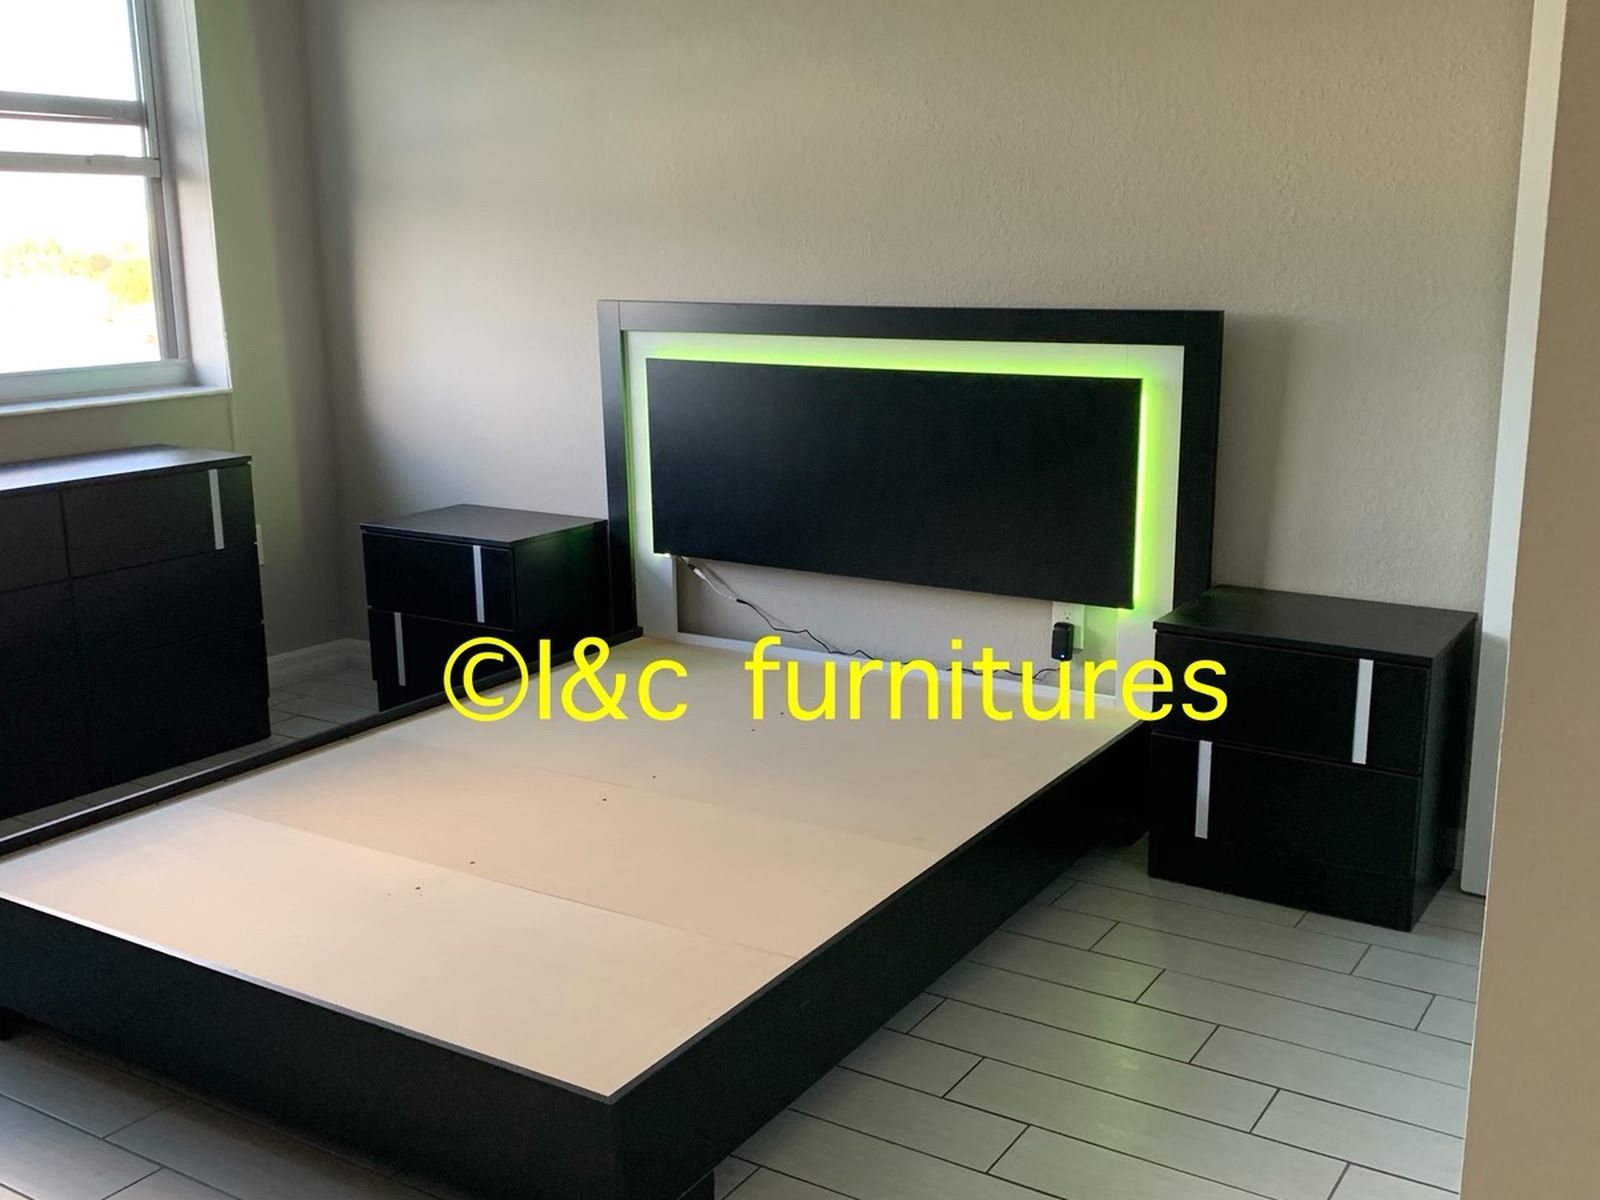 New 3 Piece Full Size Or Queen Bedroom Set Led Light Same Day Delivery. Bed Frame Night Stand And Dresser. Mattress Sold Separately And Available 